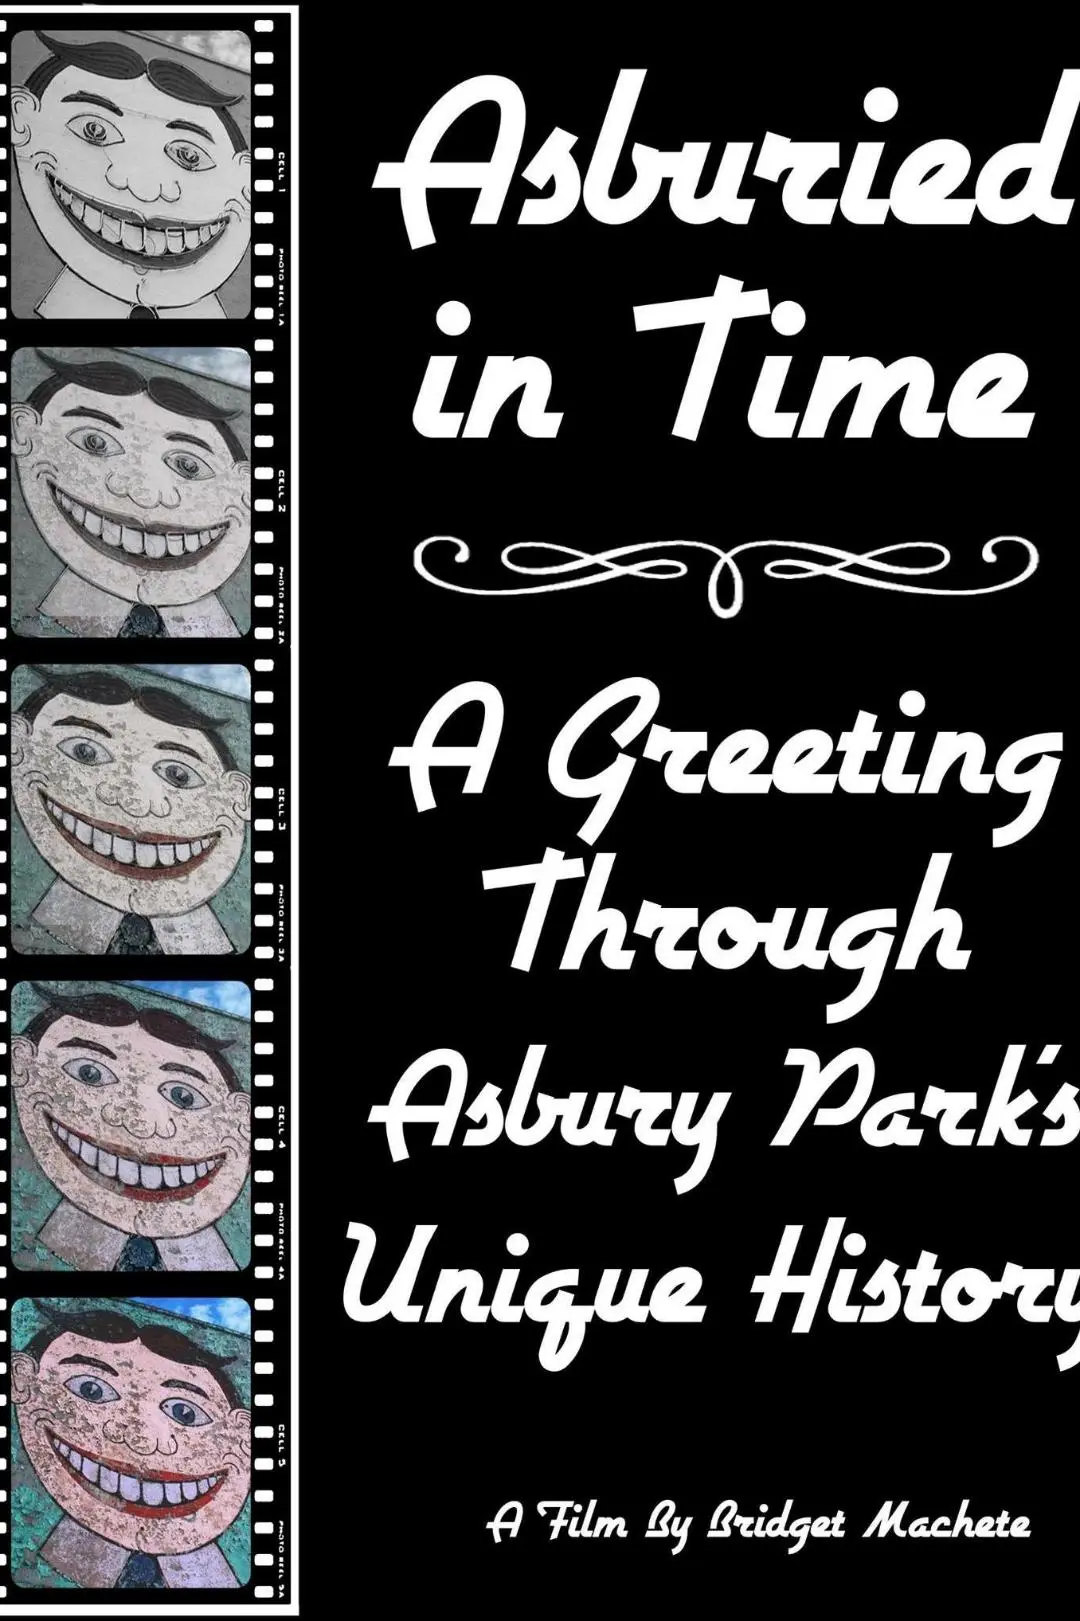 Asburried in Time, a Greeting Through Asbury Park's Unique History_peliplat